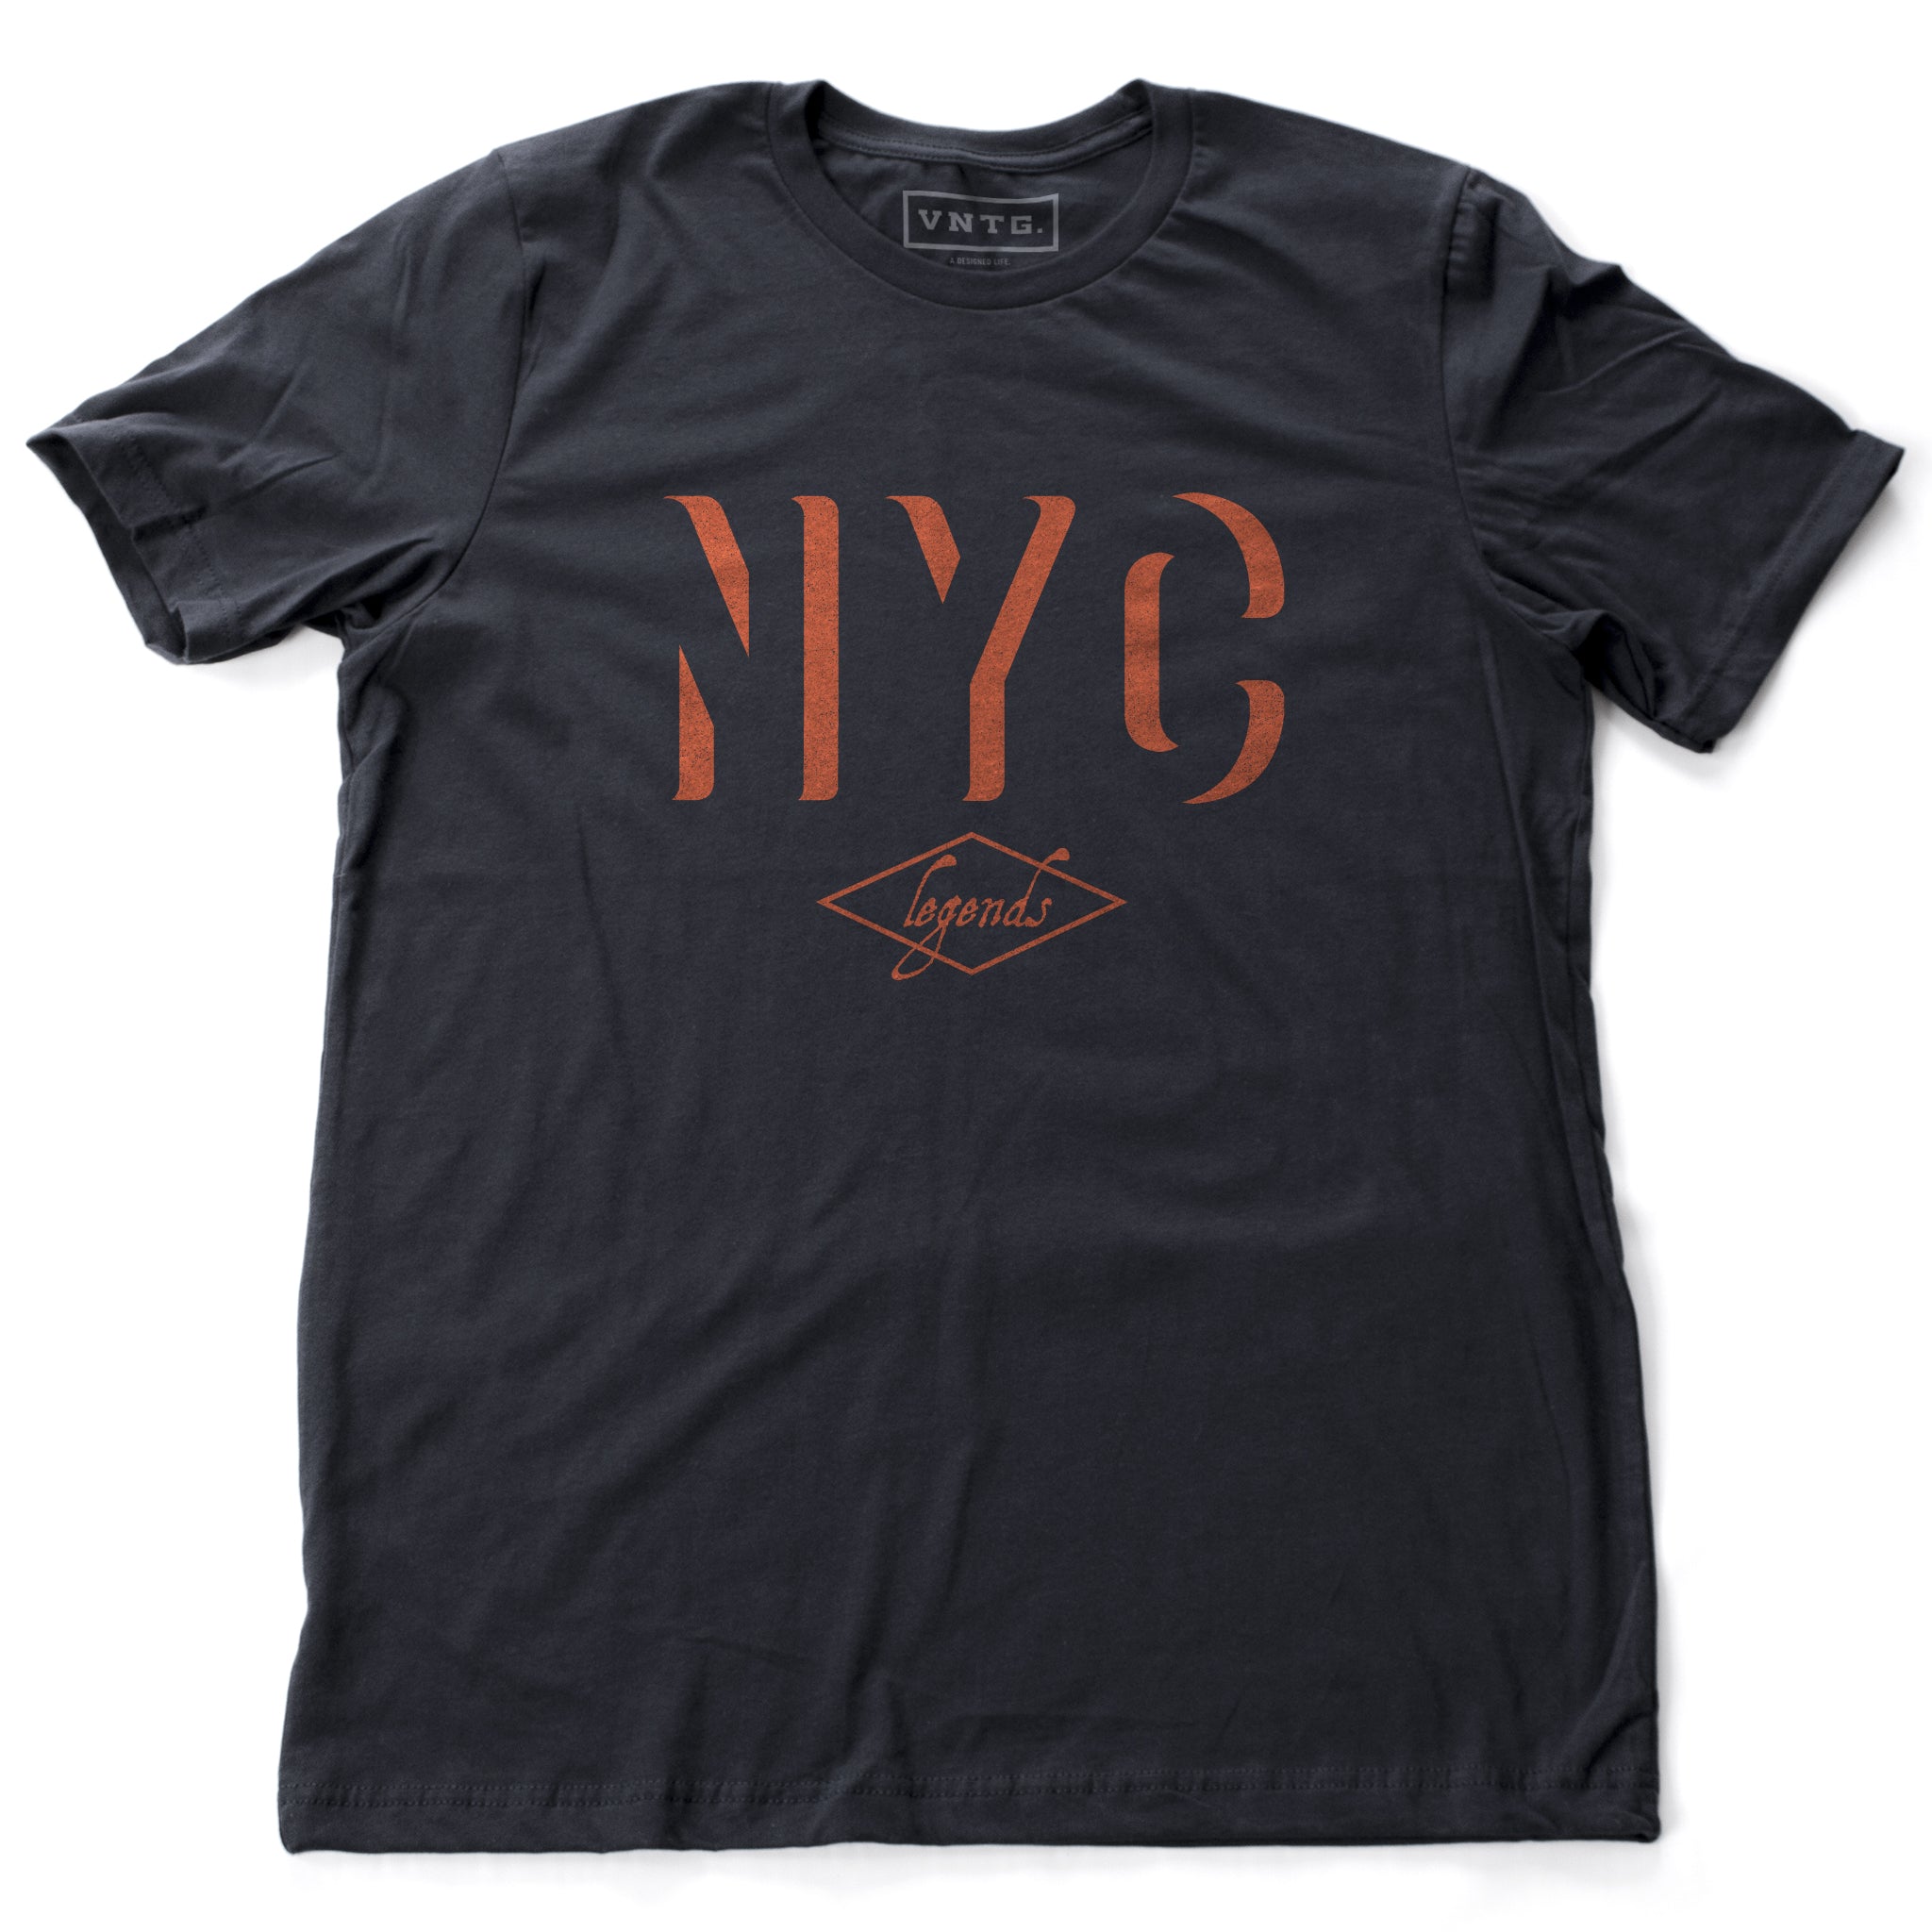 A retro, vintage-inspired t-shirt in Classic Navy Blue with a bold “NYC” in an orange shadow font, and the word “legends” inscript below. By fashion brand VNTG., from wolfsaint.net